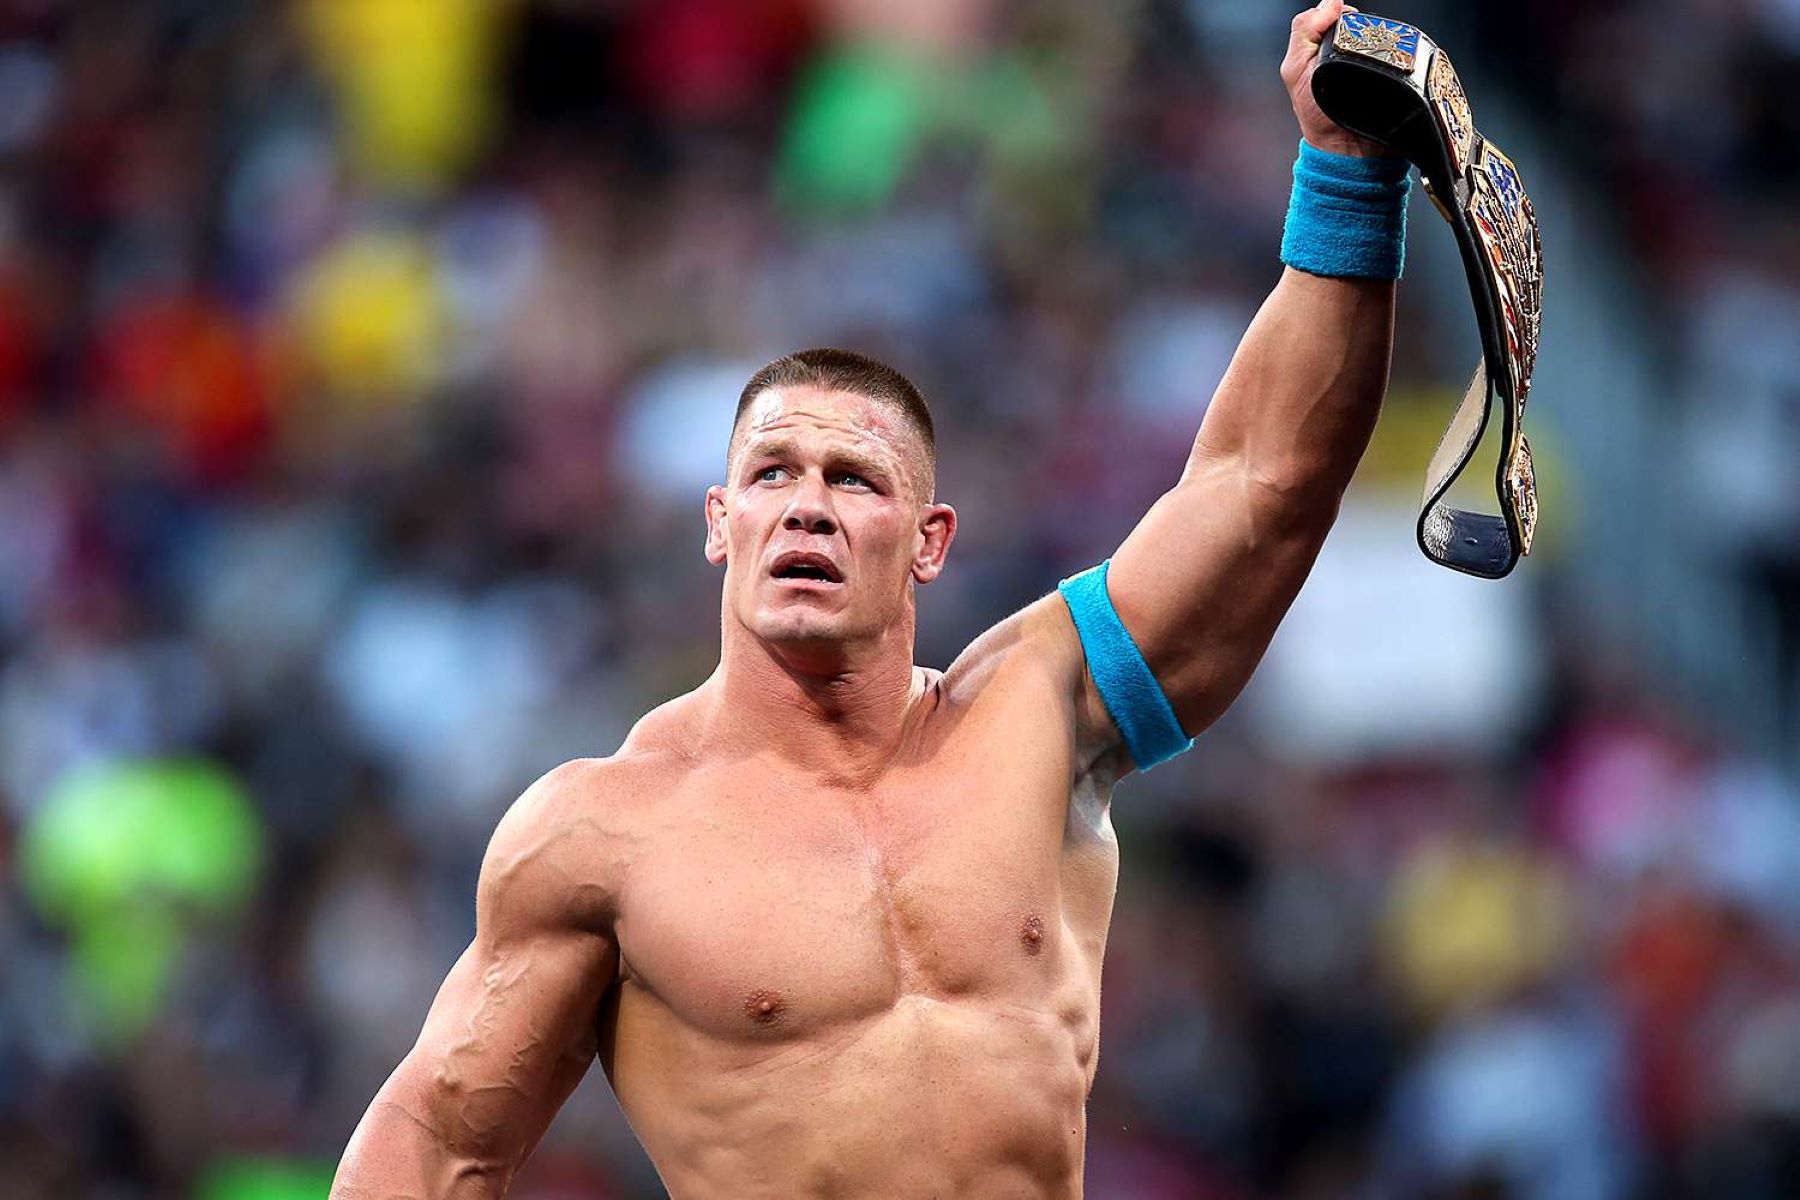 How To Get John Cena’s Ripped Physique Naturally